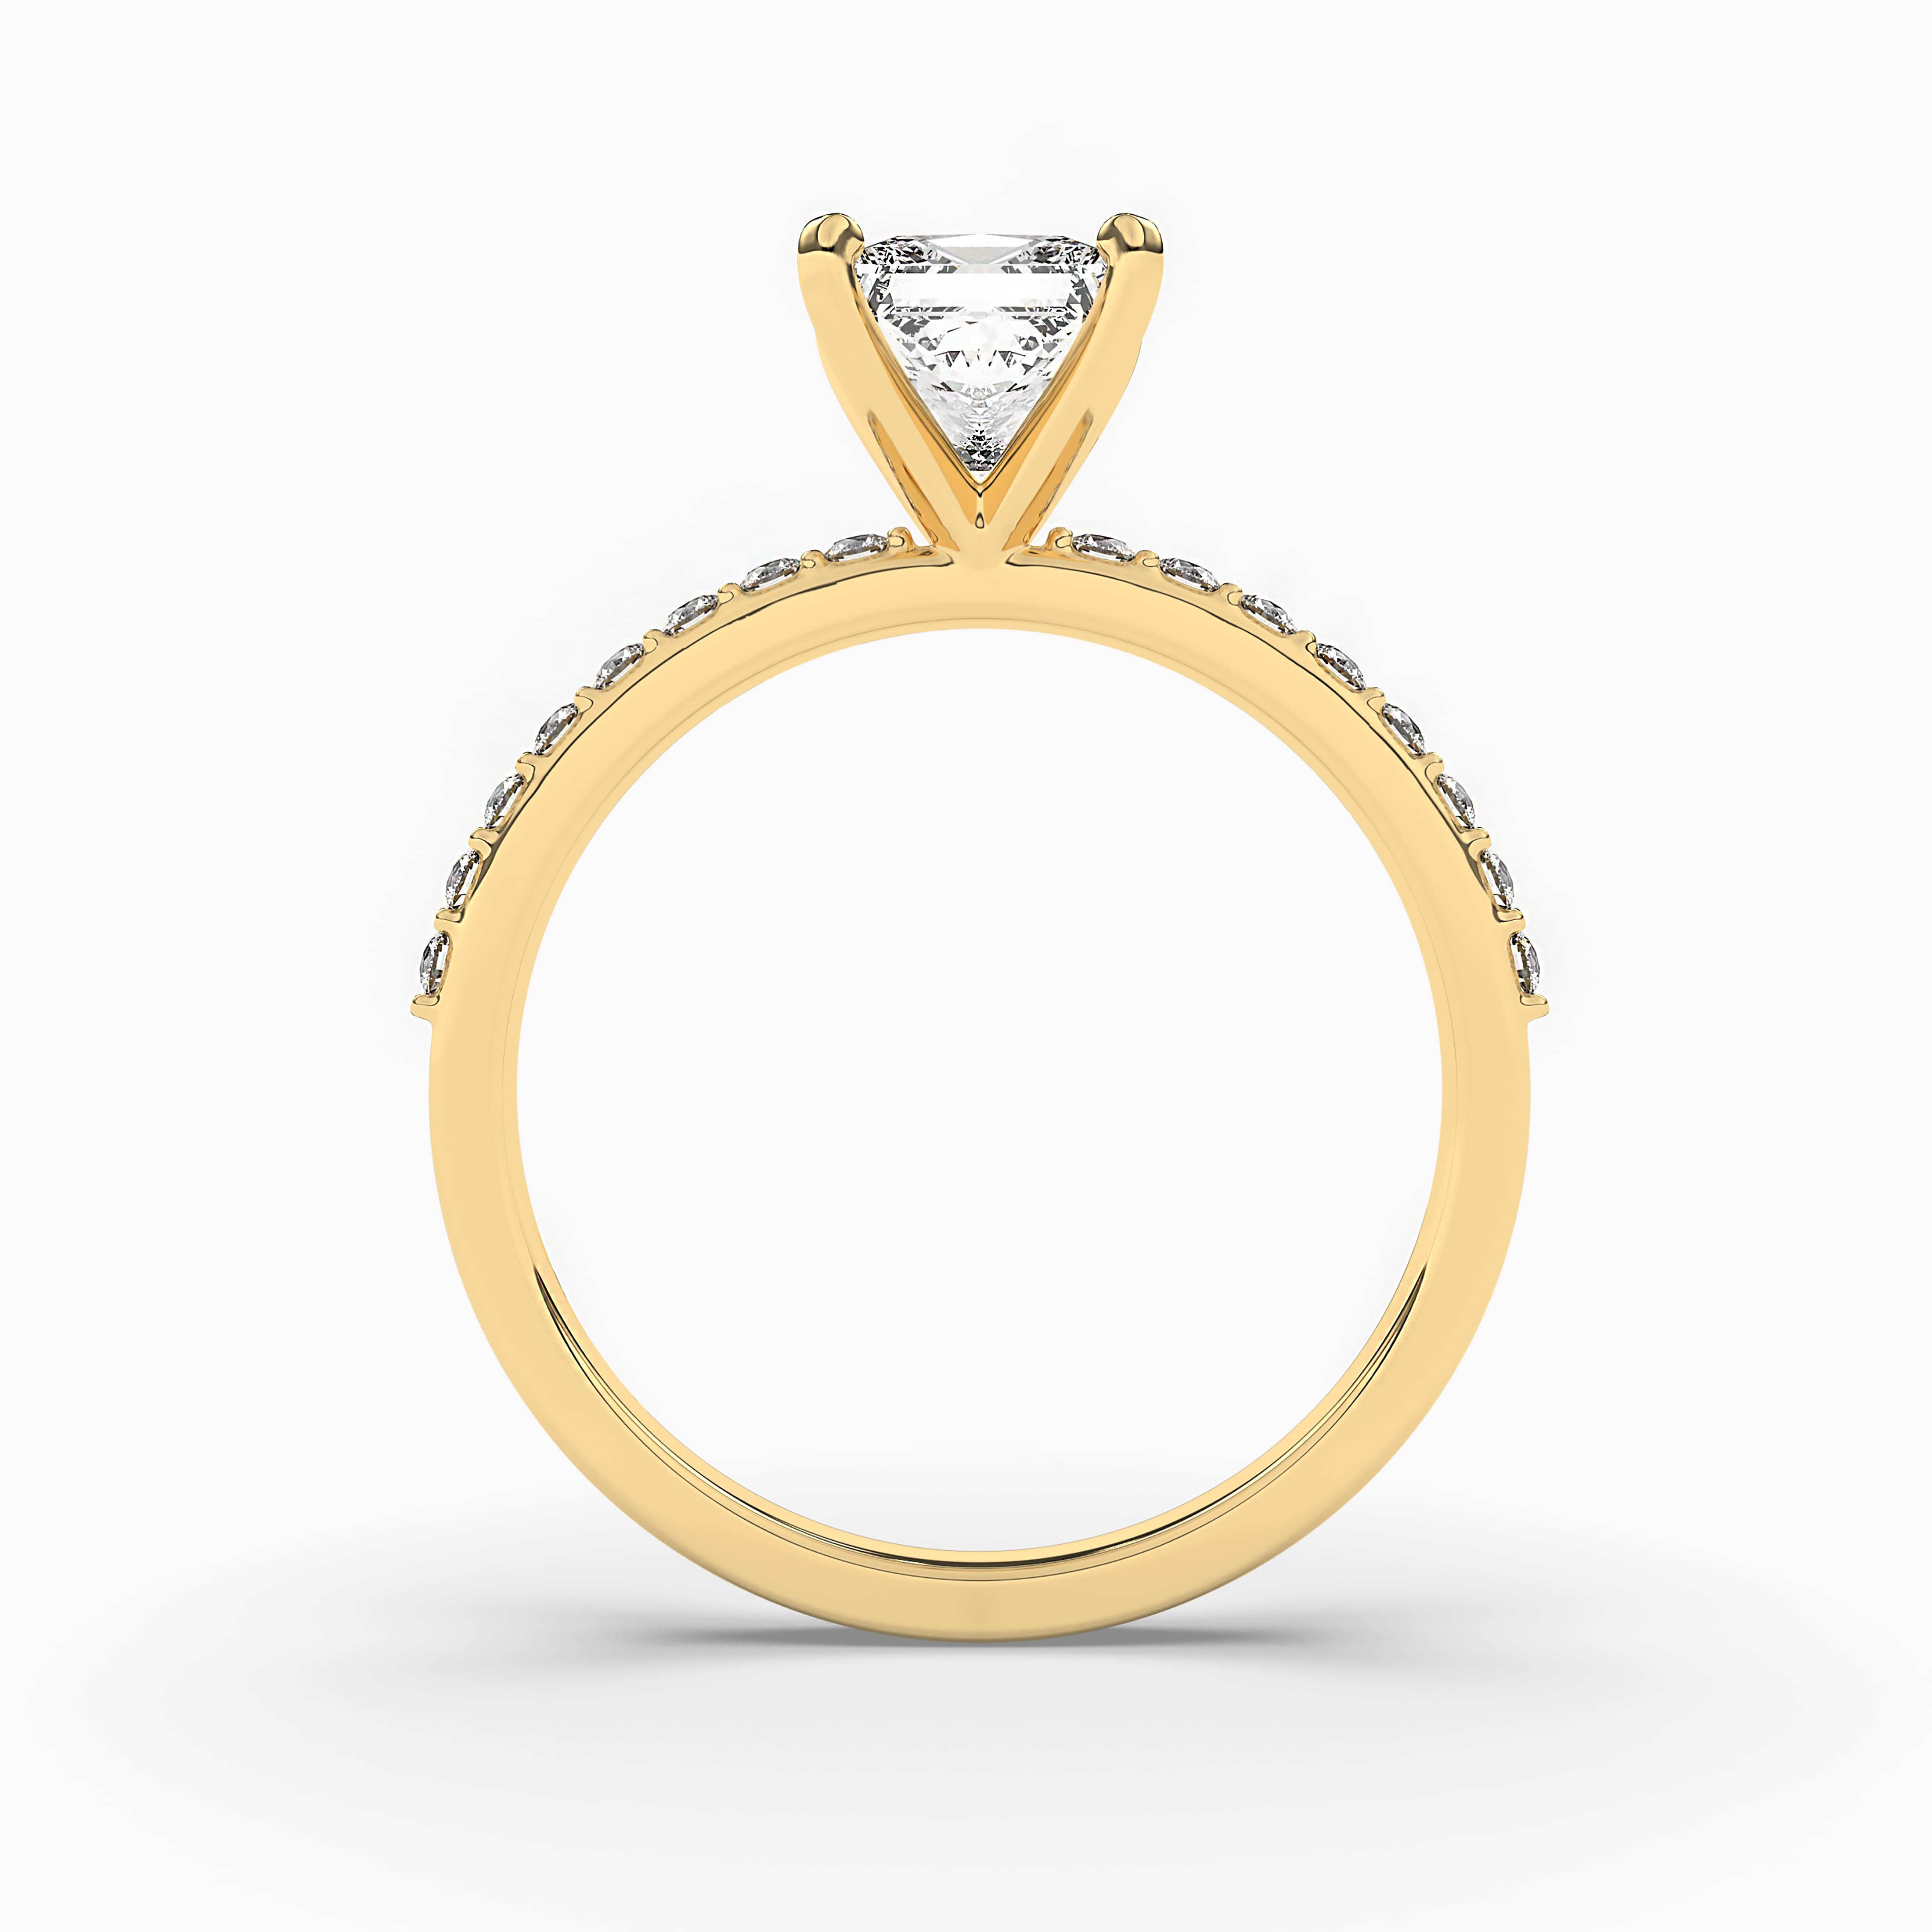 Princess Cut Diamond Ring Yellow Gold Engagement Ring Solitaire Ring